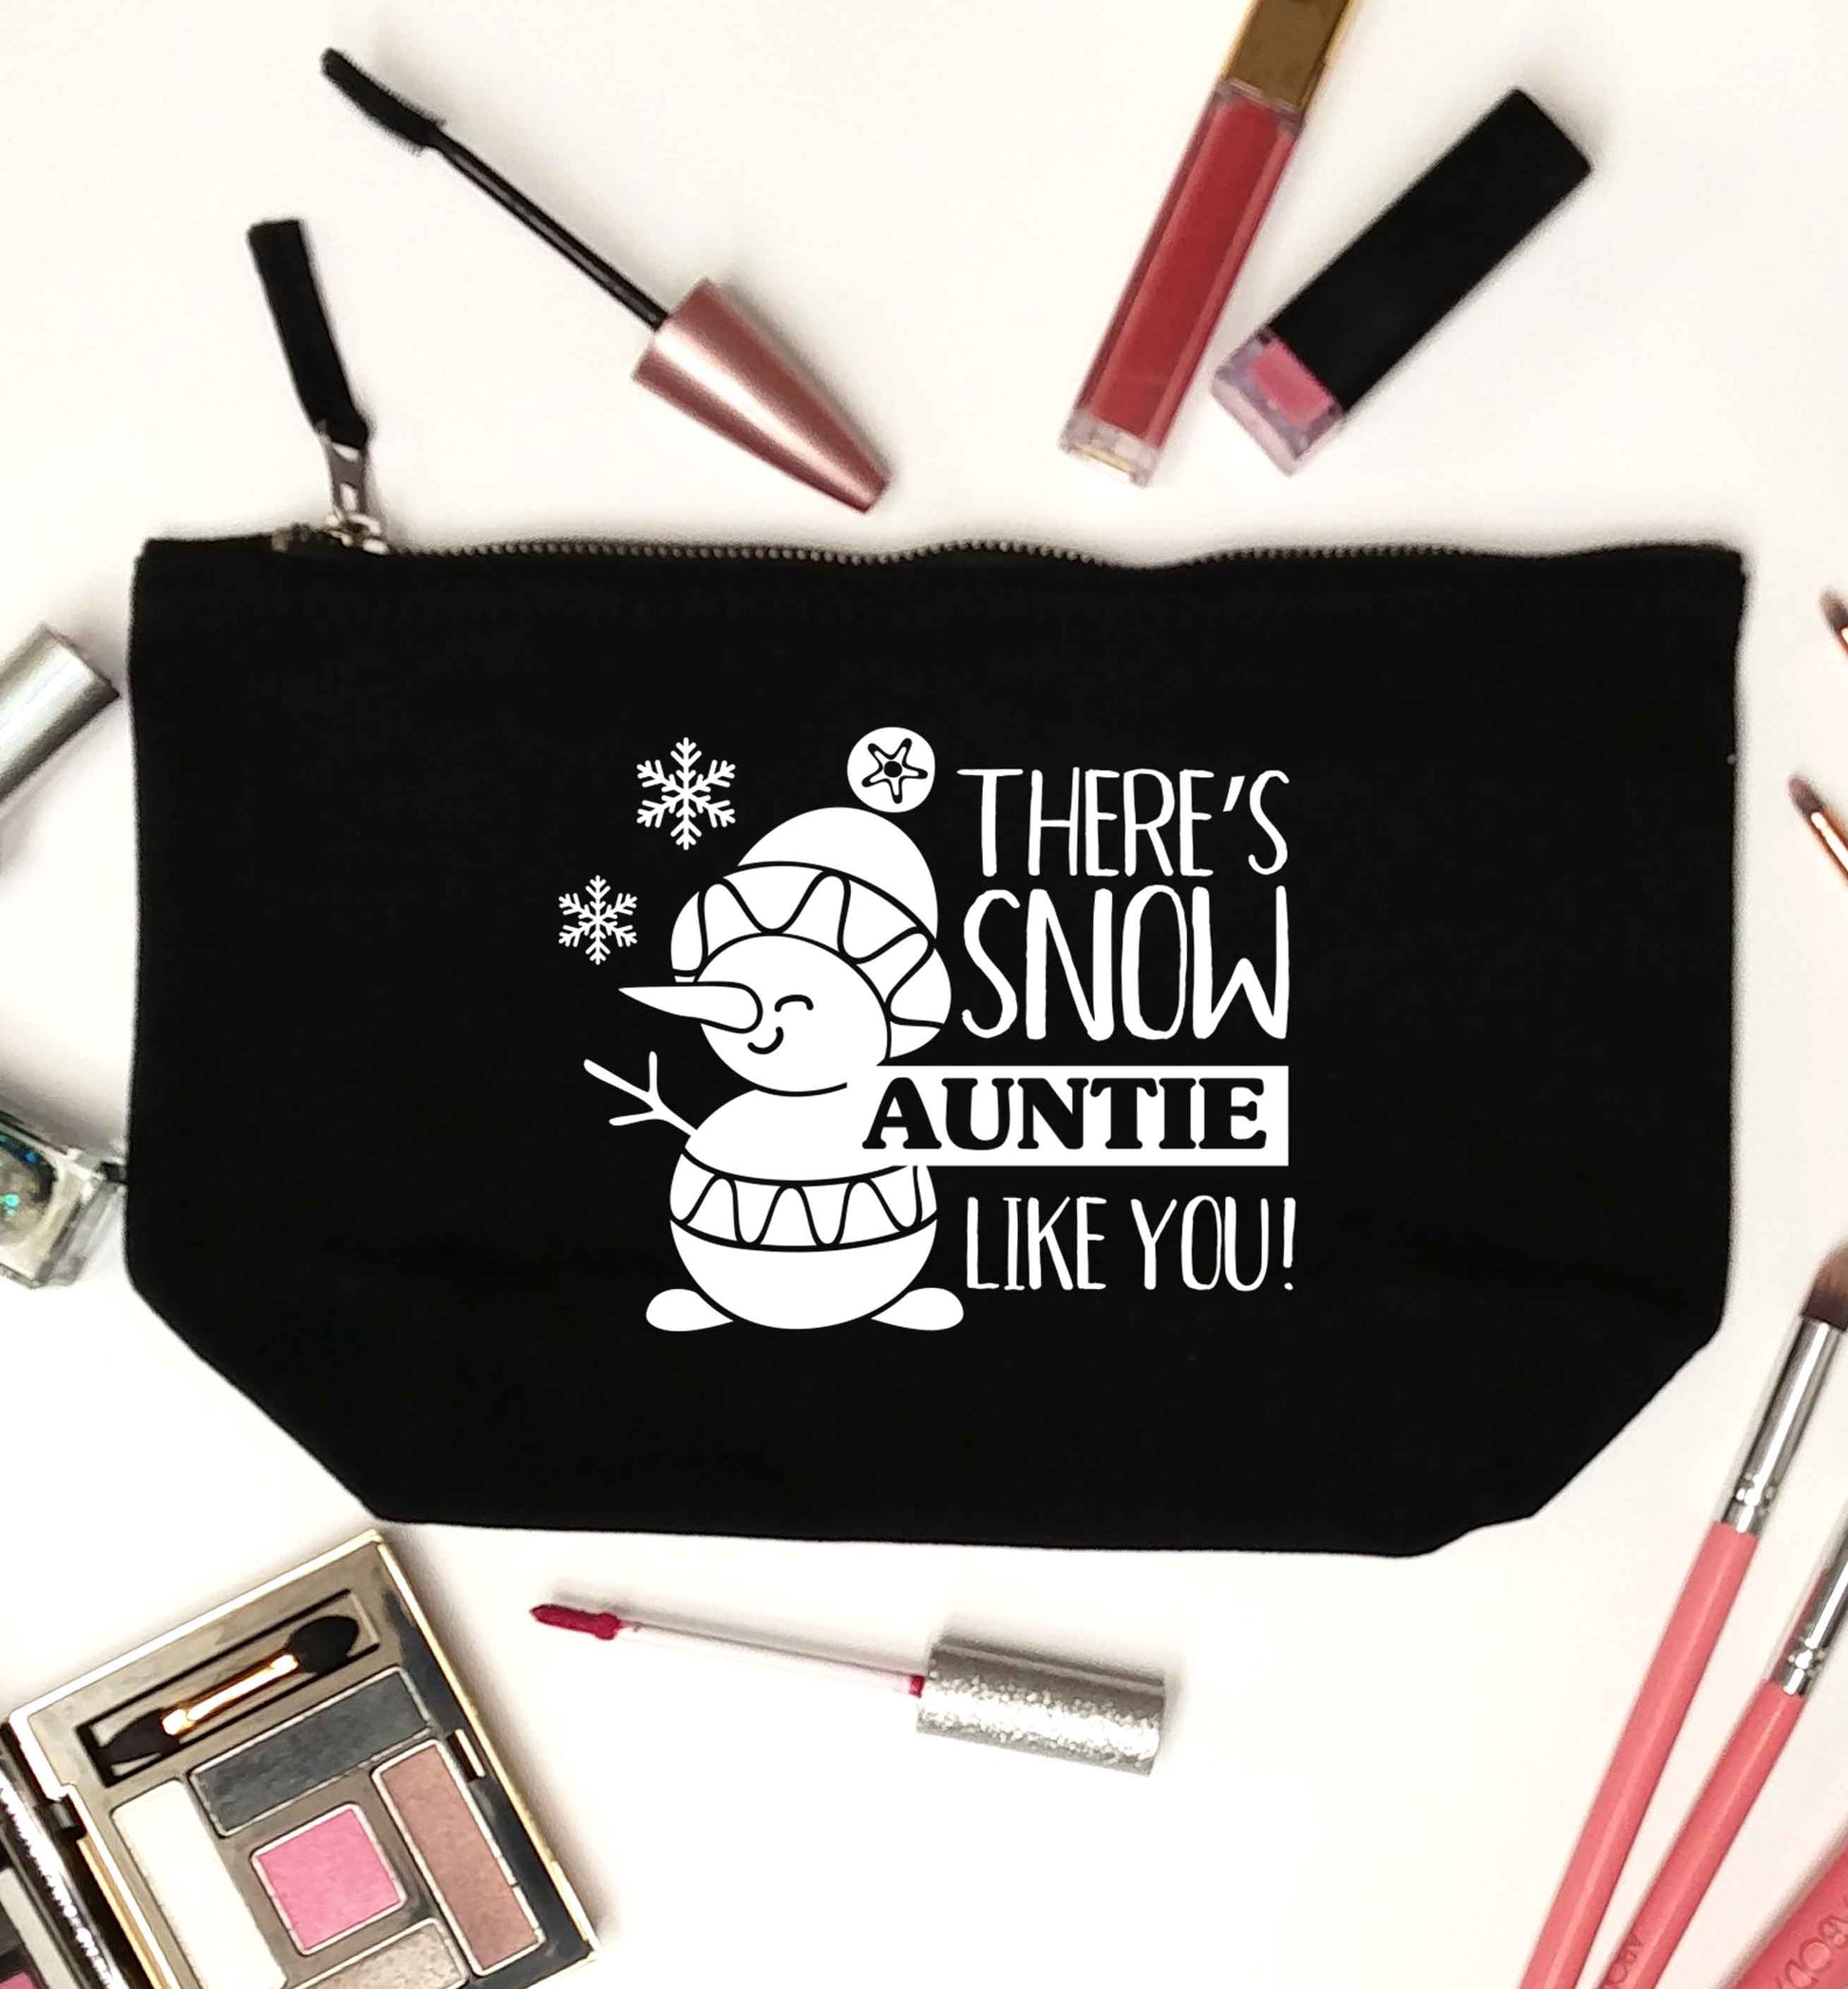 There's snow auntie like you black makeup bag